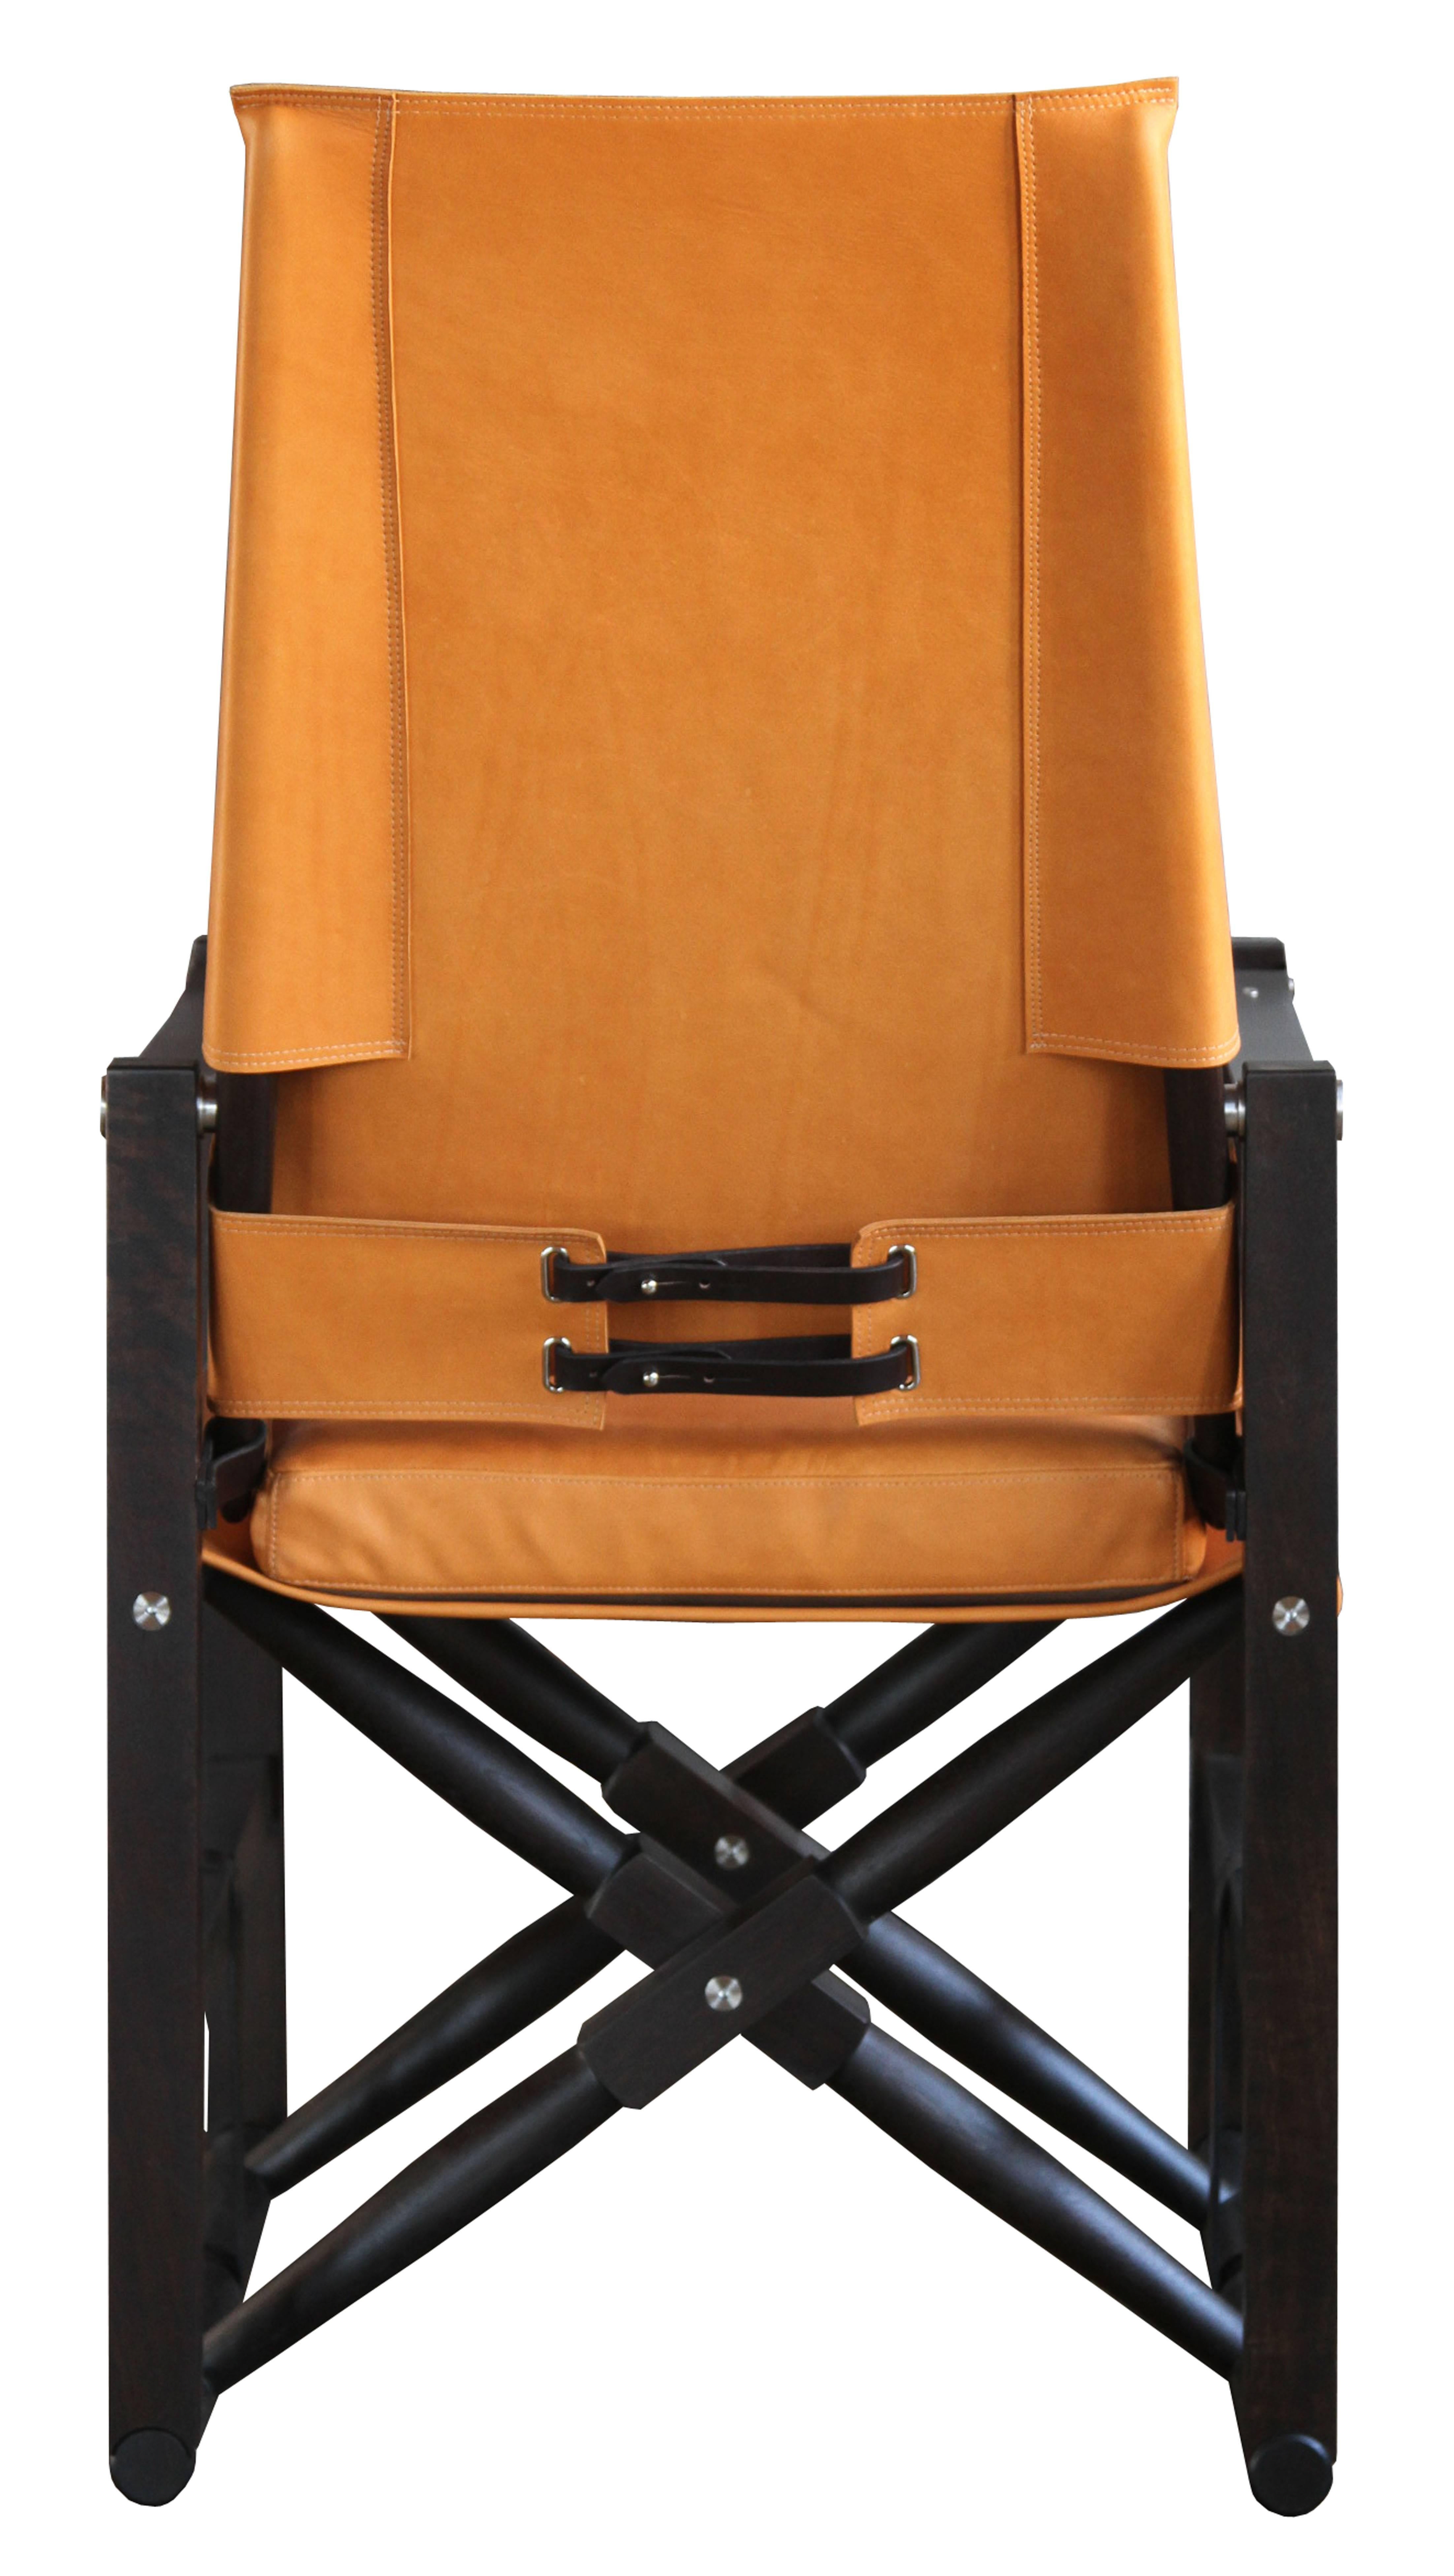 Modern Folding Cabourn Sail Chair - handcrafted by Richard Wrightman Design